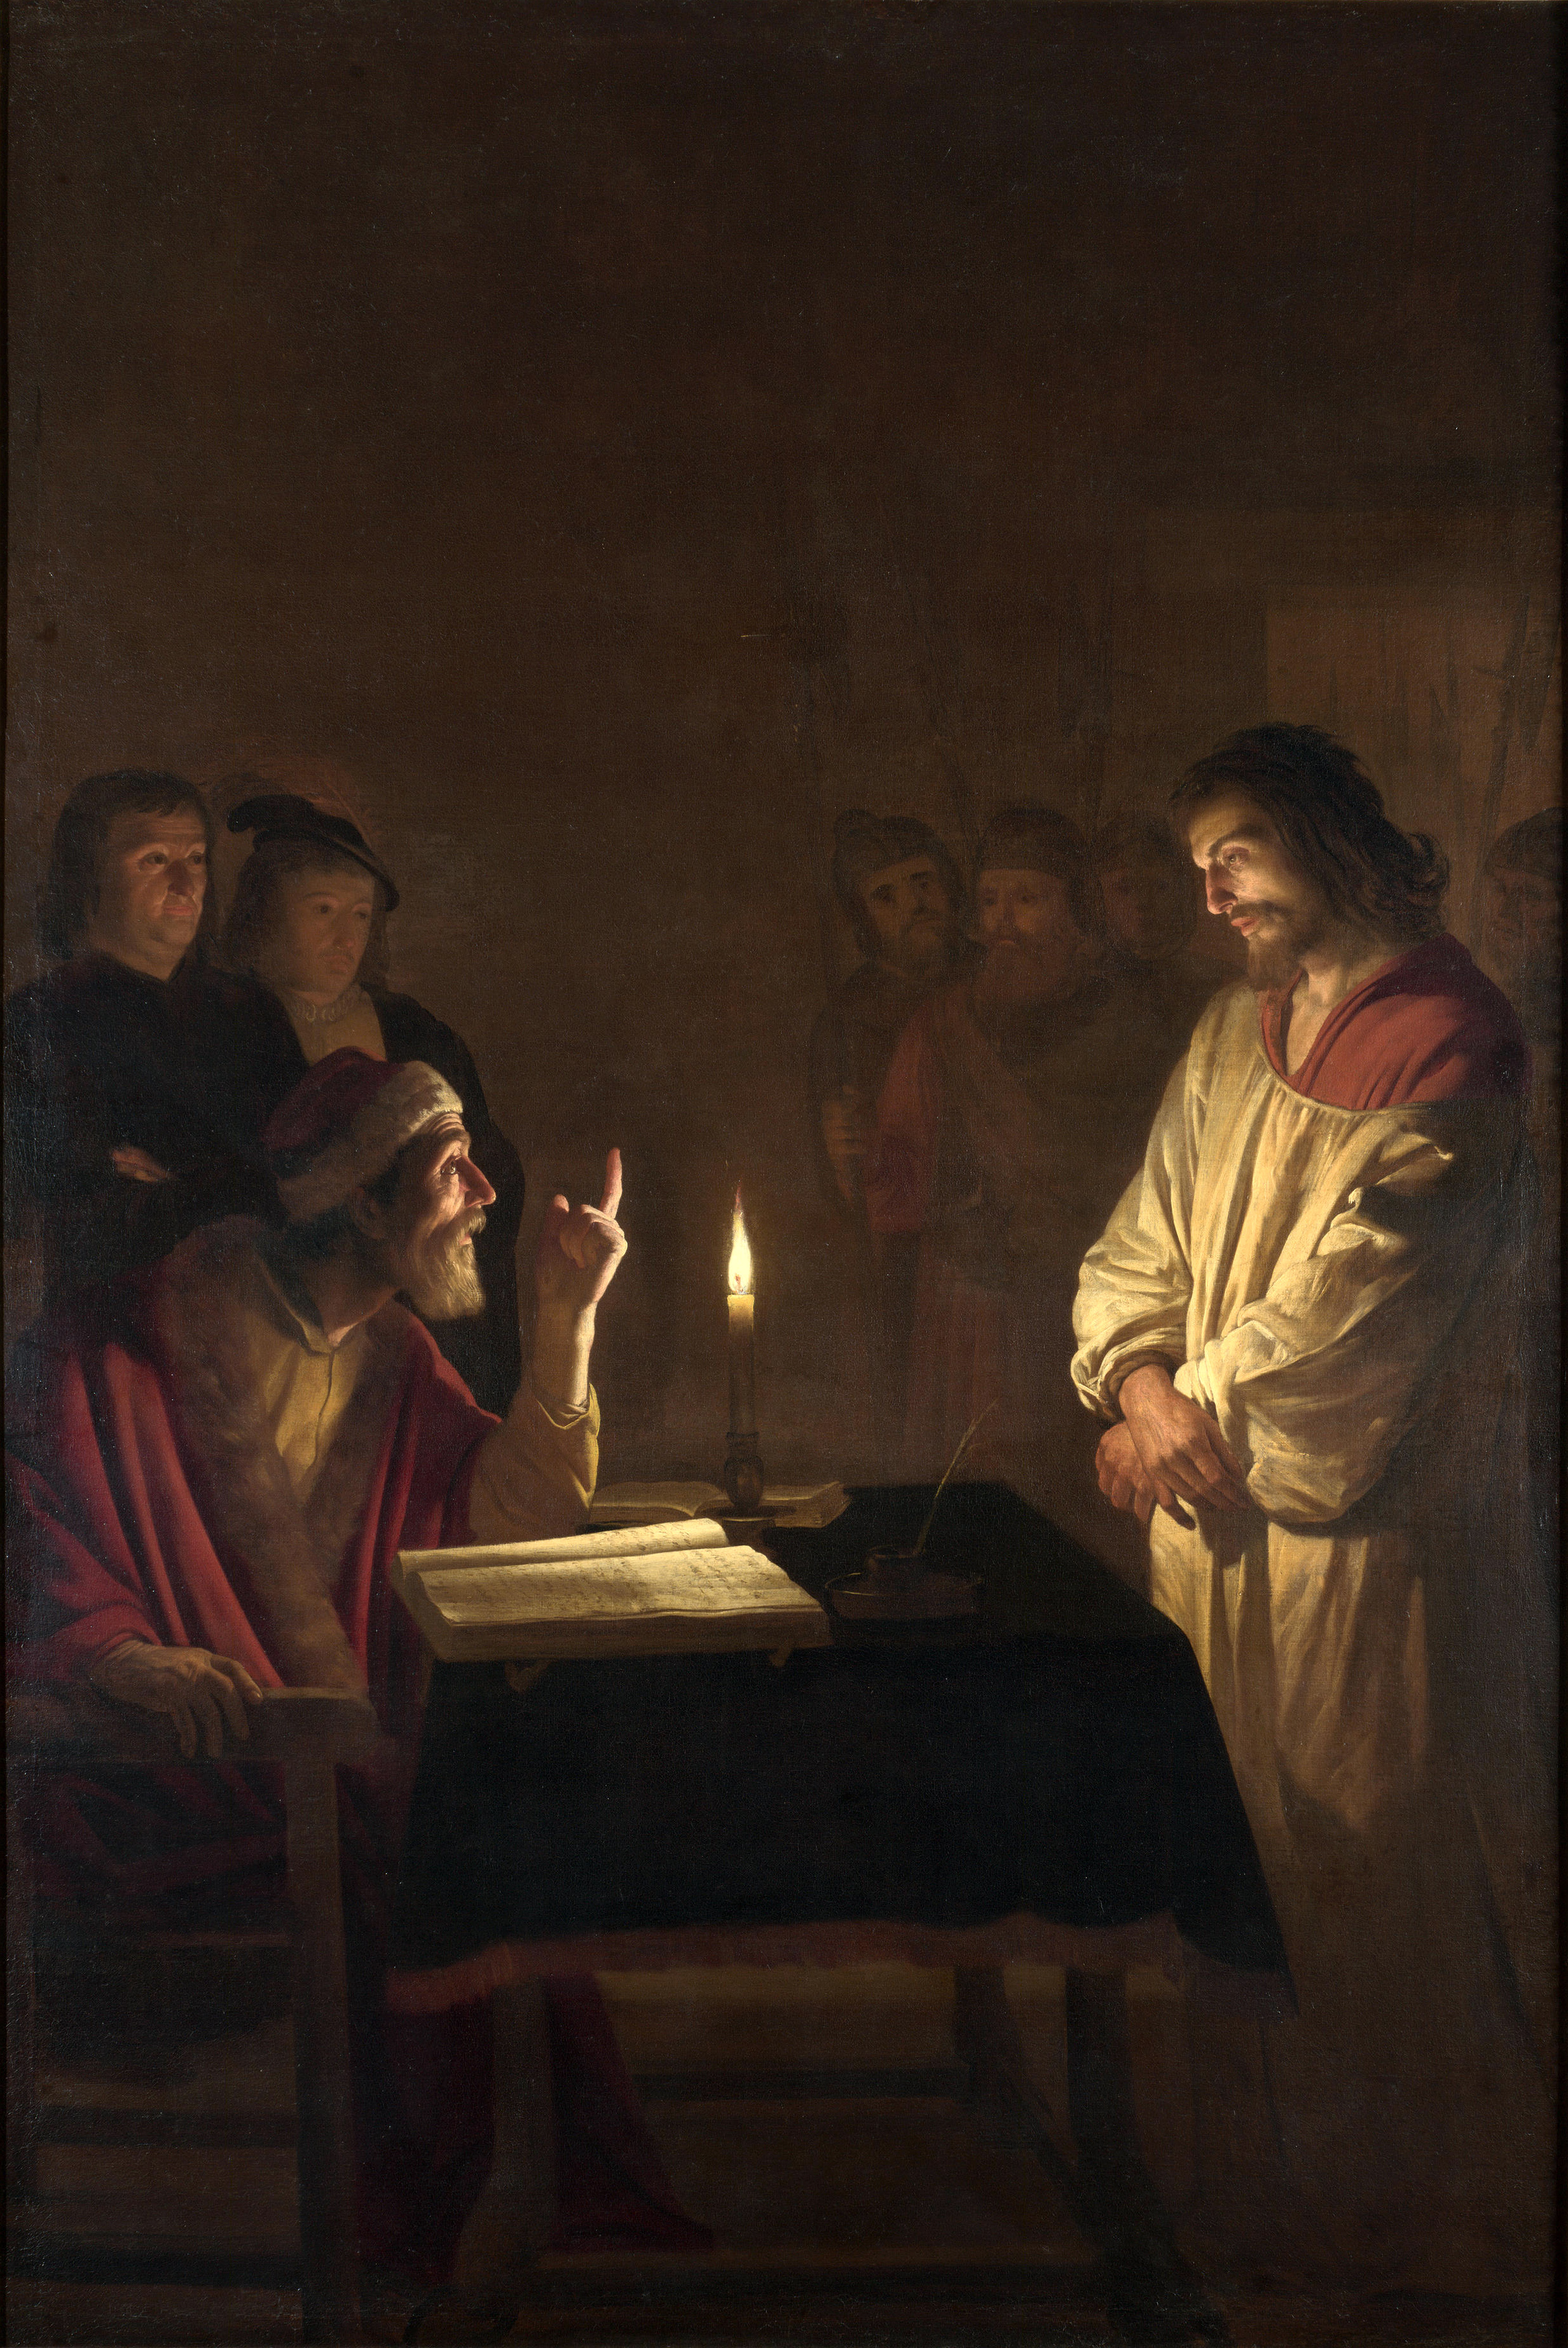 Christ Before the High Priest by Gerard van Honthorst - c. 1617 - 272 x 183 cm National Gallery